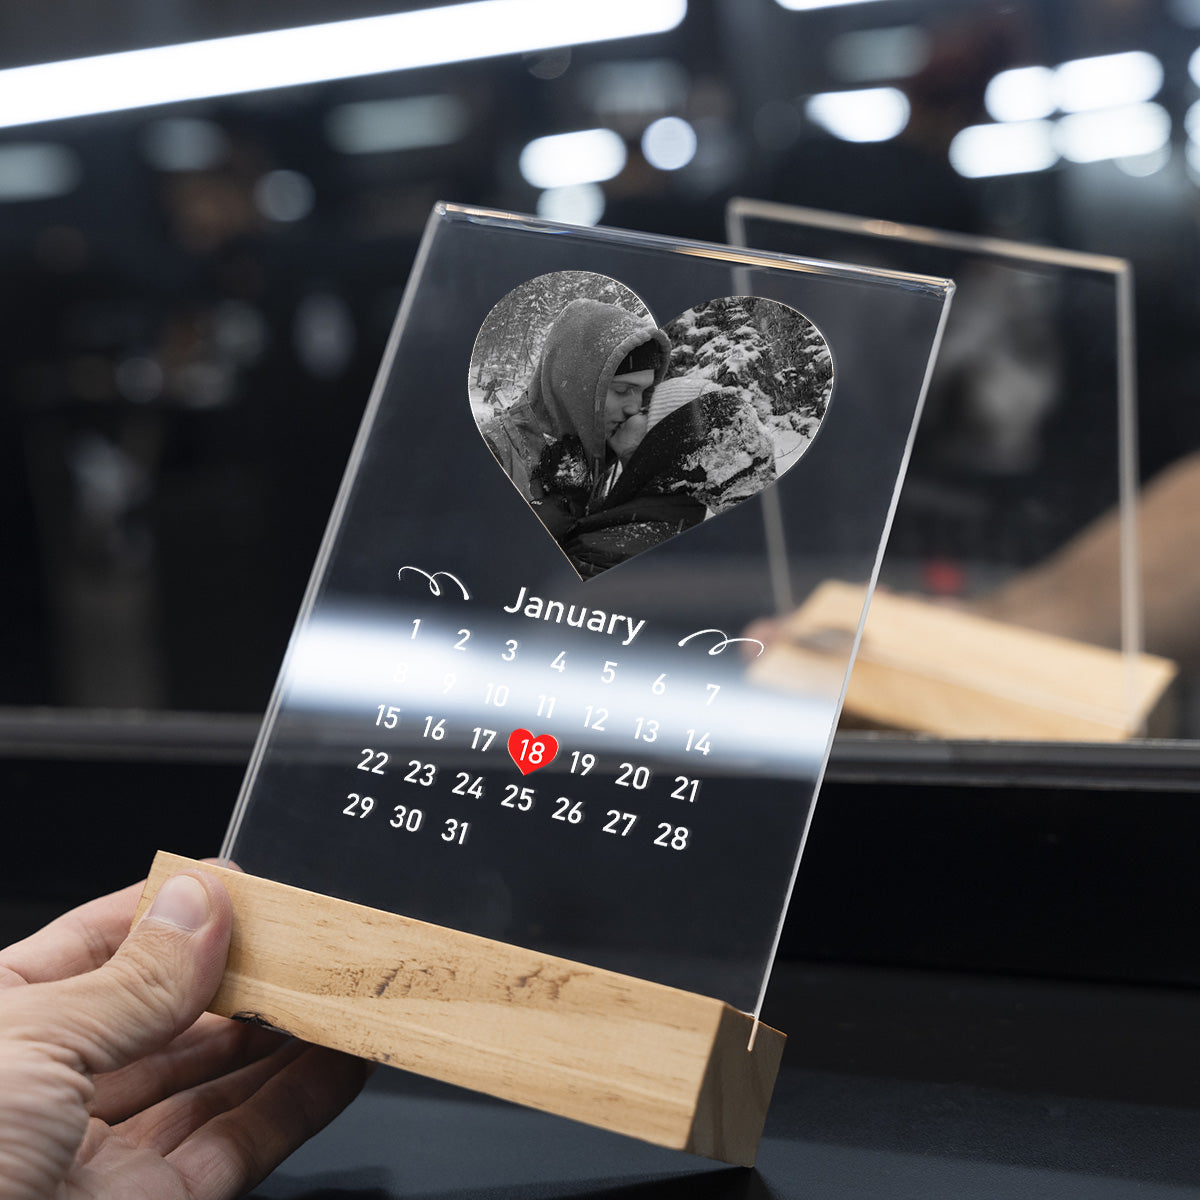 Personalized Transparent Plaque with Calendar and Photo